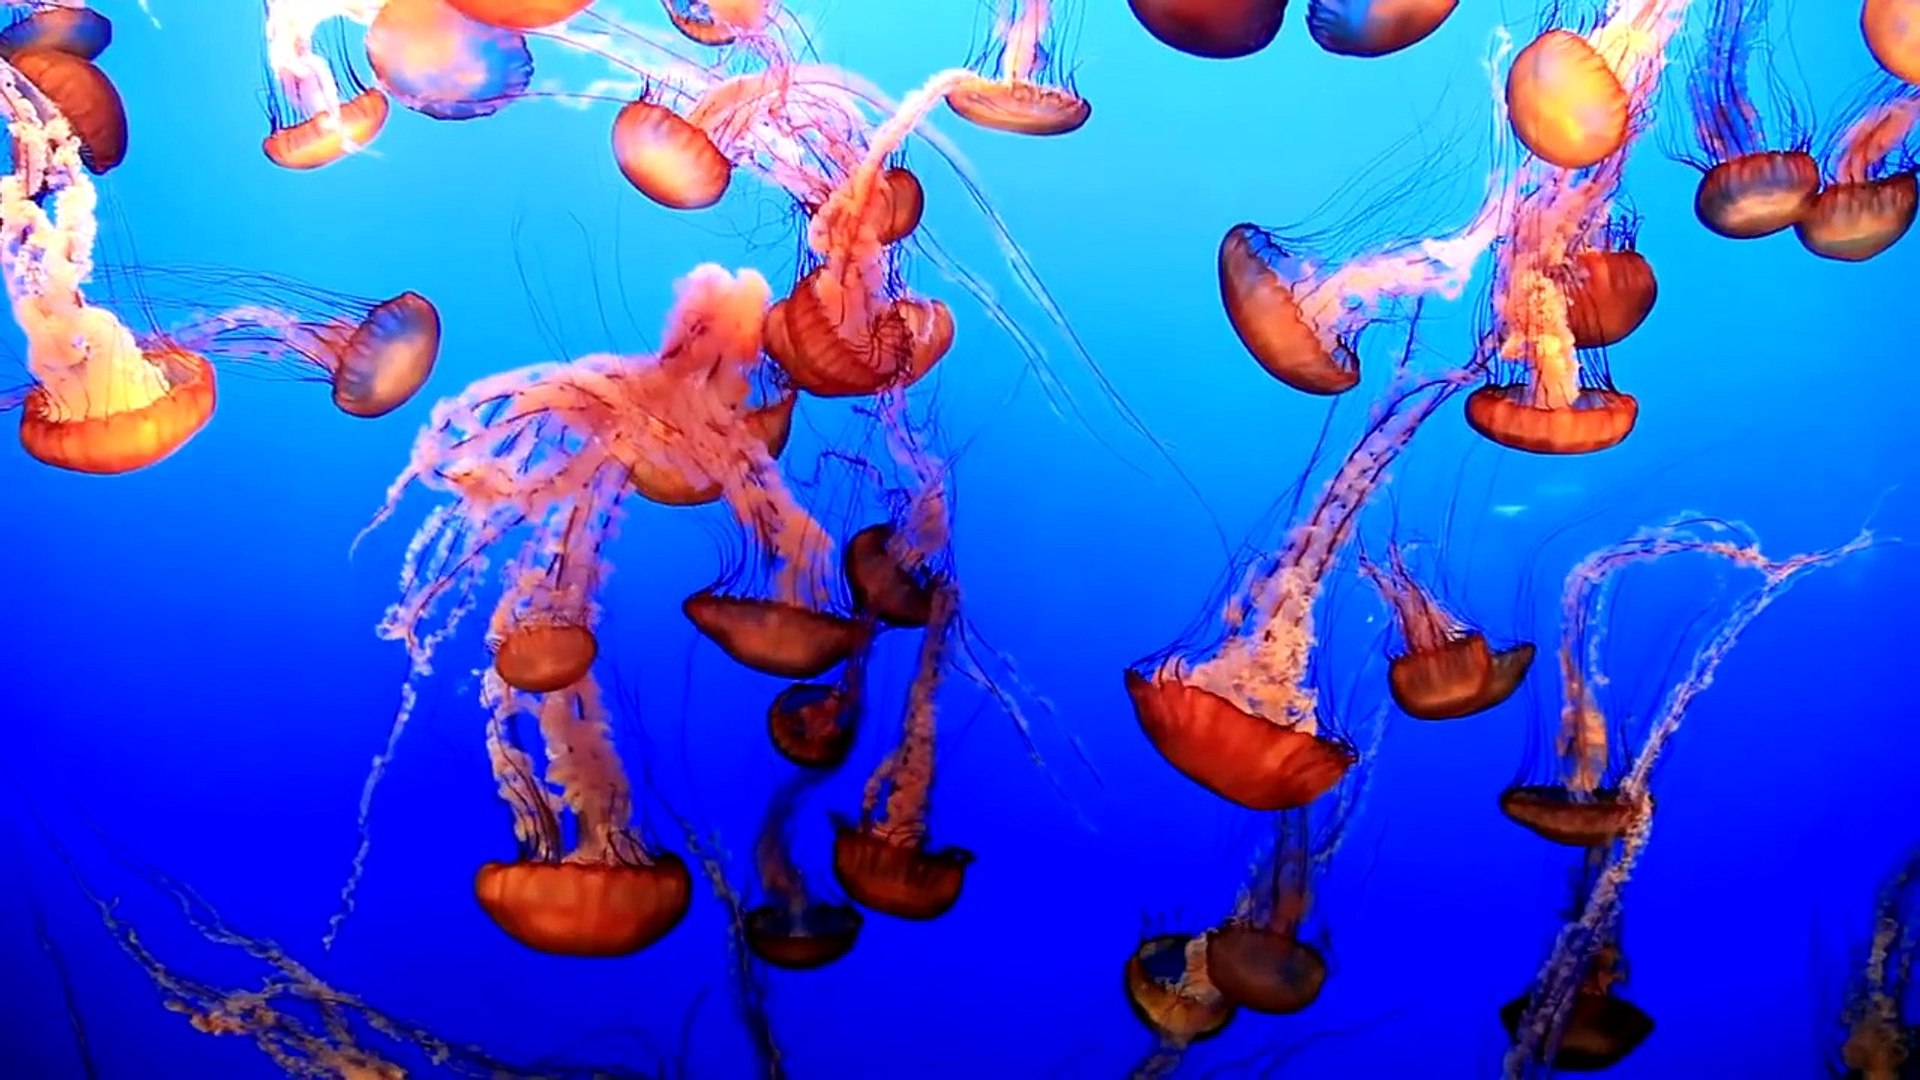 Pictures at an Exhibition: Dance of Jellyfish